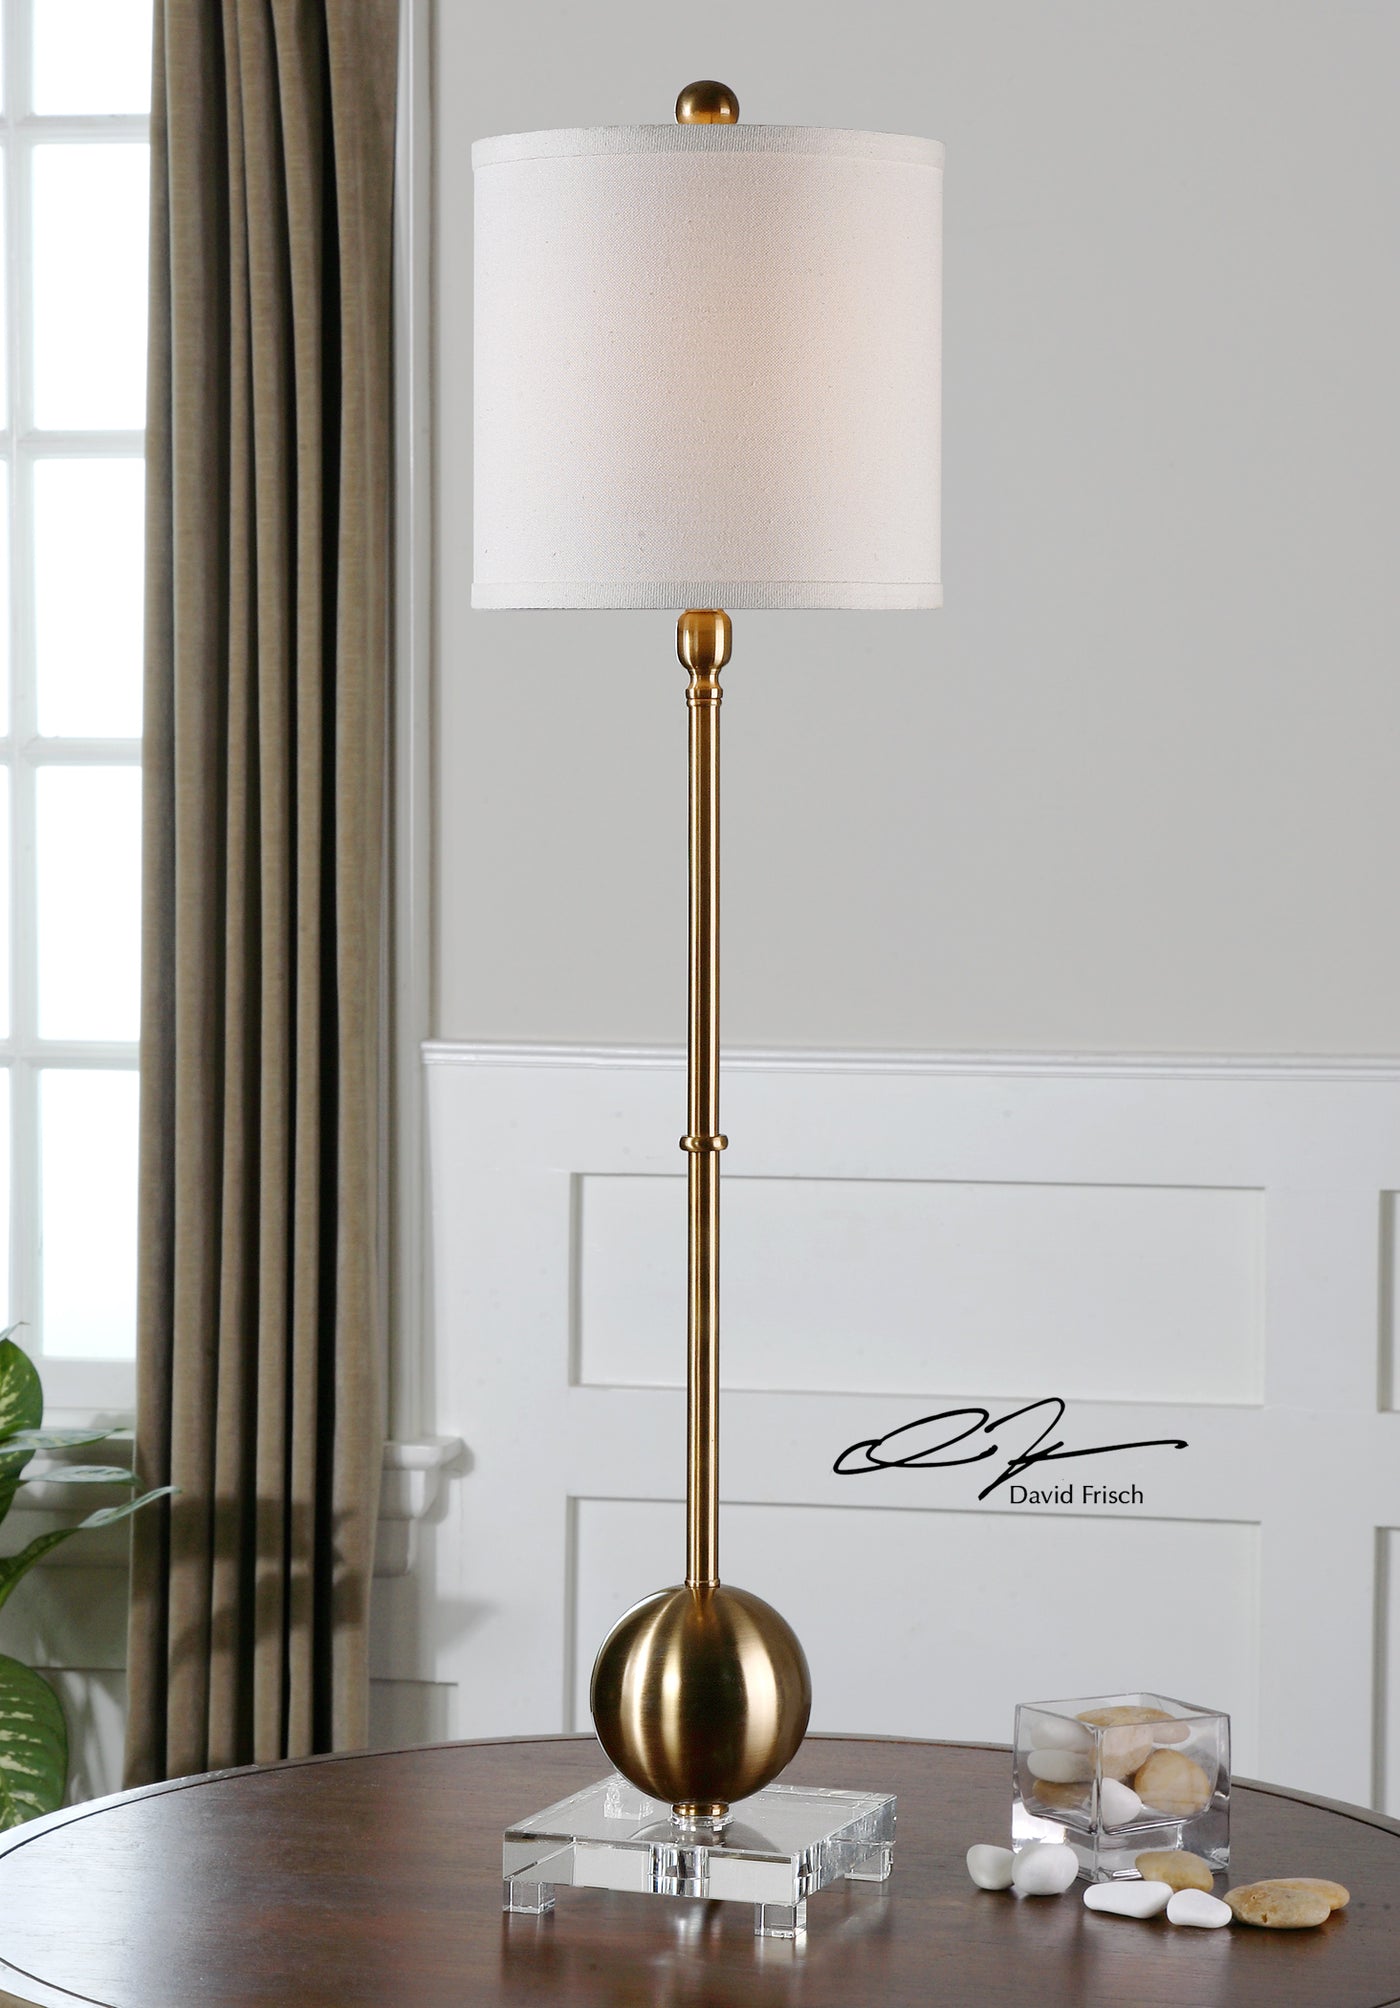 This Versatile Buffet Lamp Features Smooth Iron Details Finished In A Plated Brushed Brass, Accented With A Thick Crystal ...